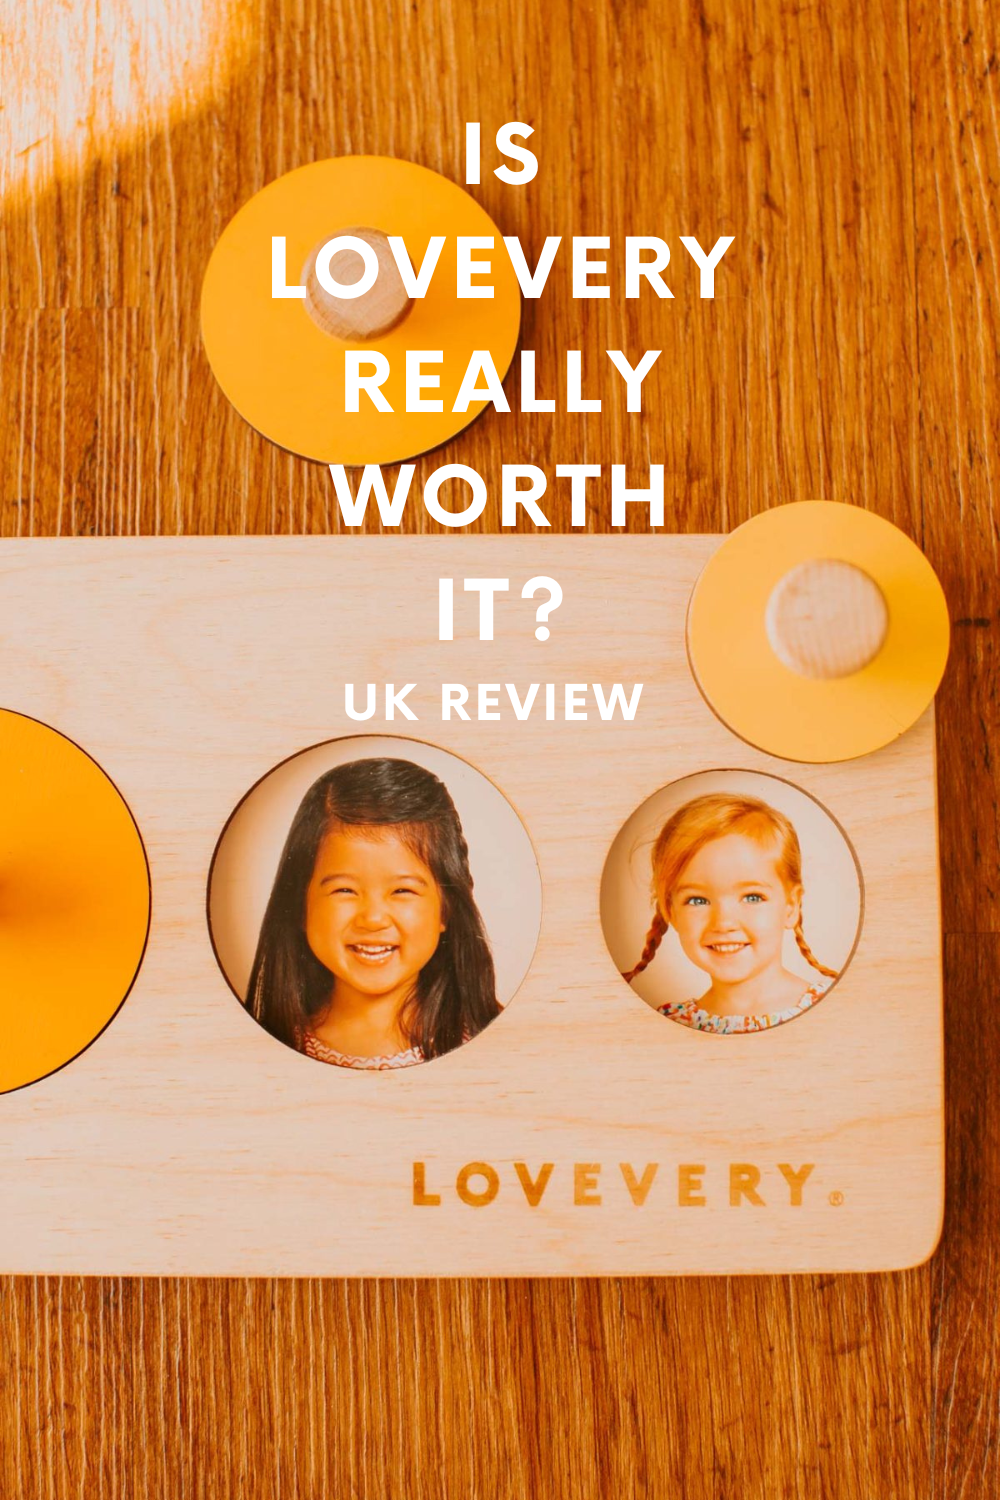 Is Lovevery worth it?